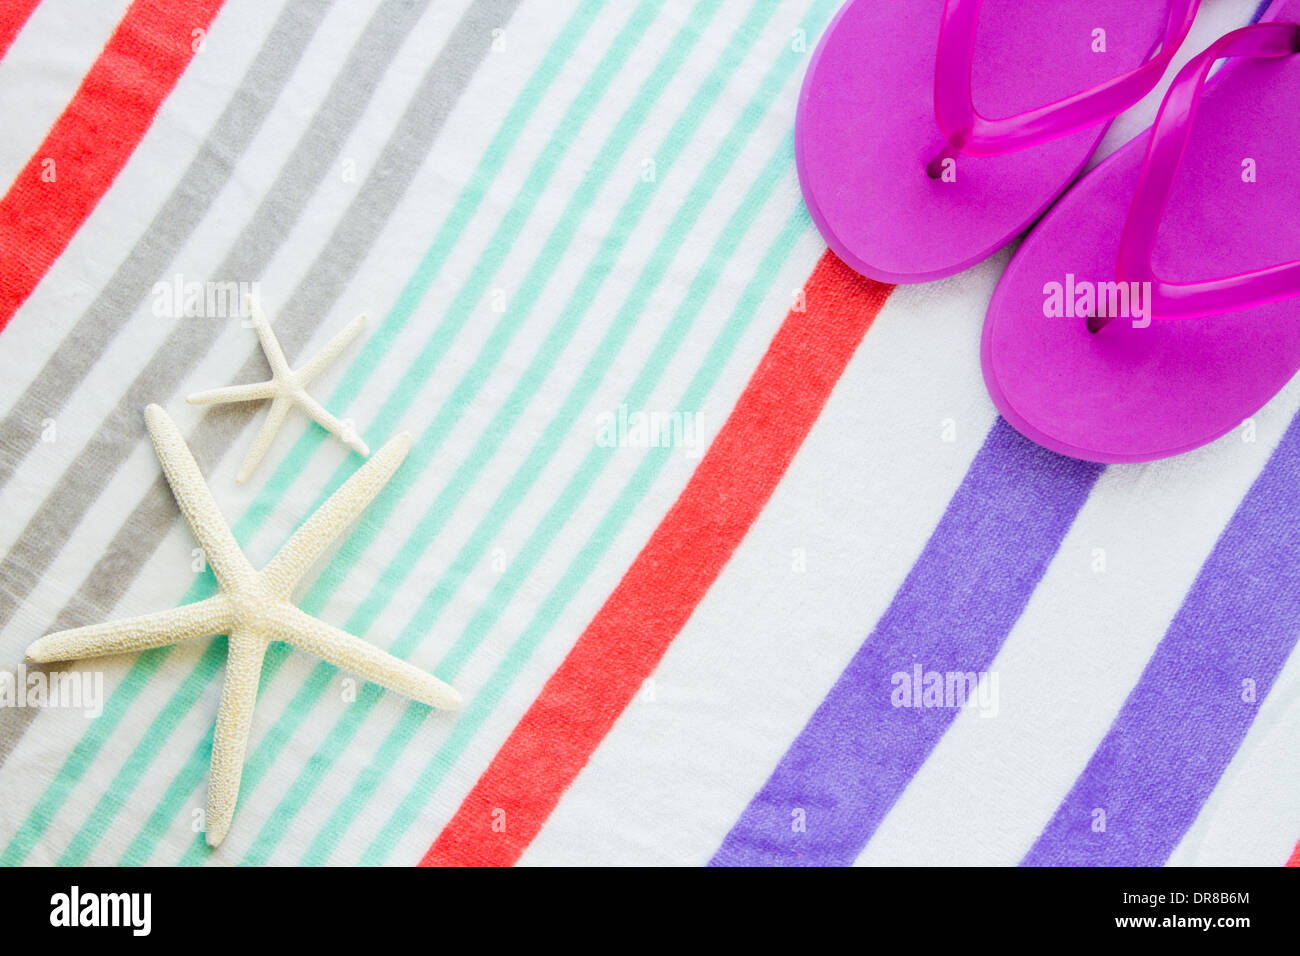 Beach scene with purple flip flops and two starfish on a striped beach towel. Stock Photo